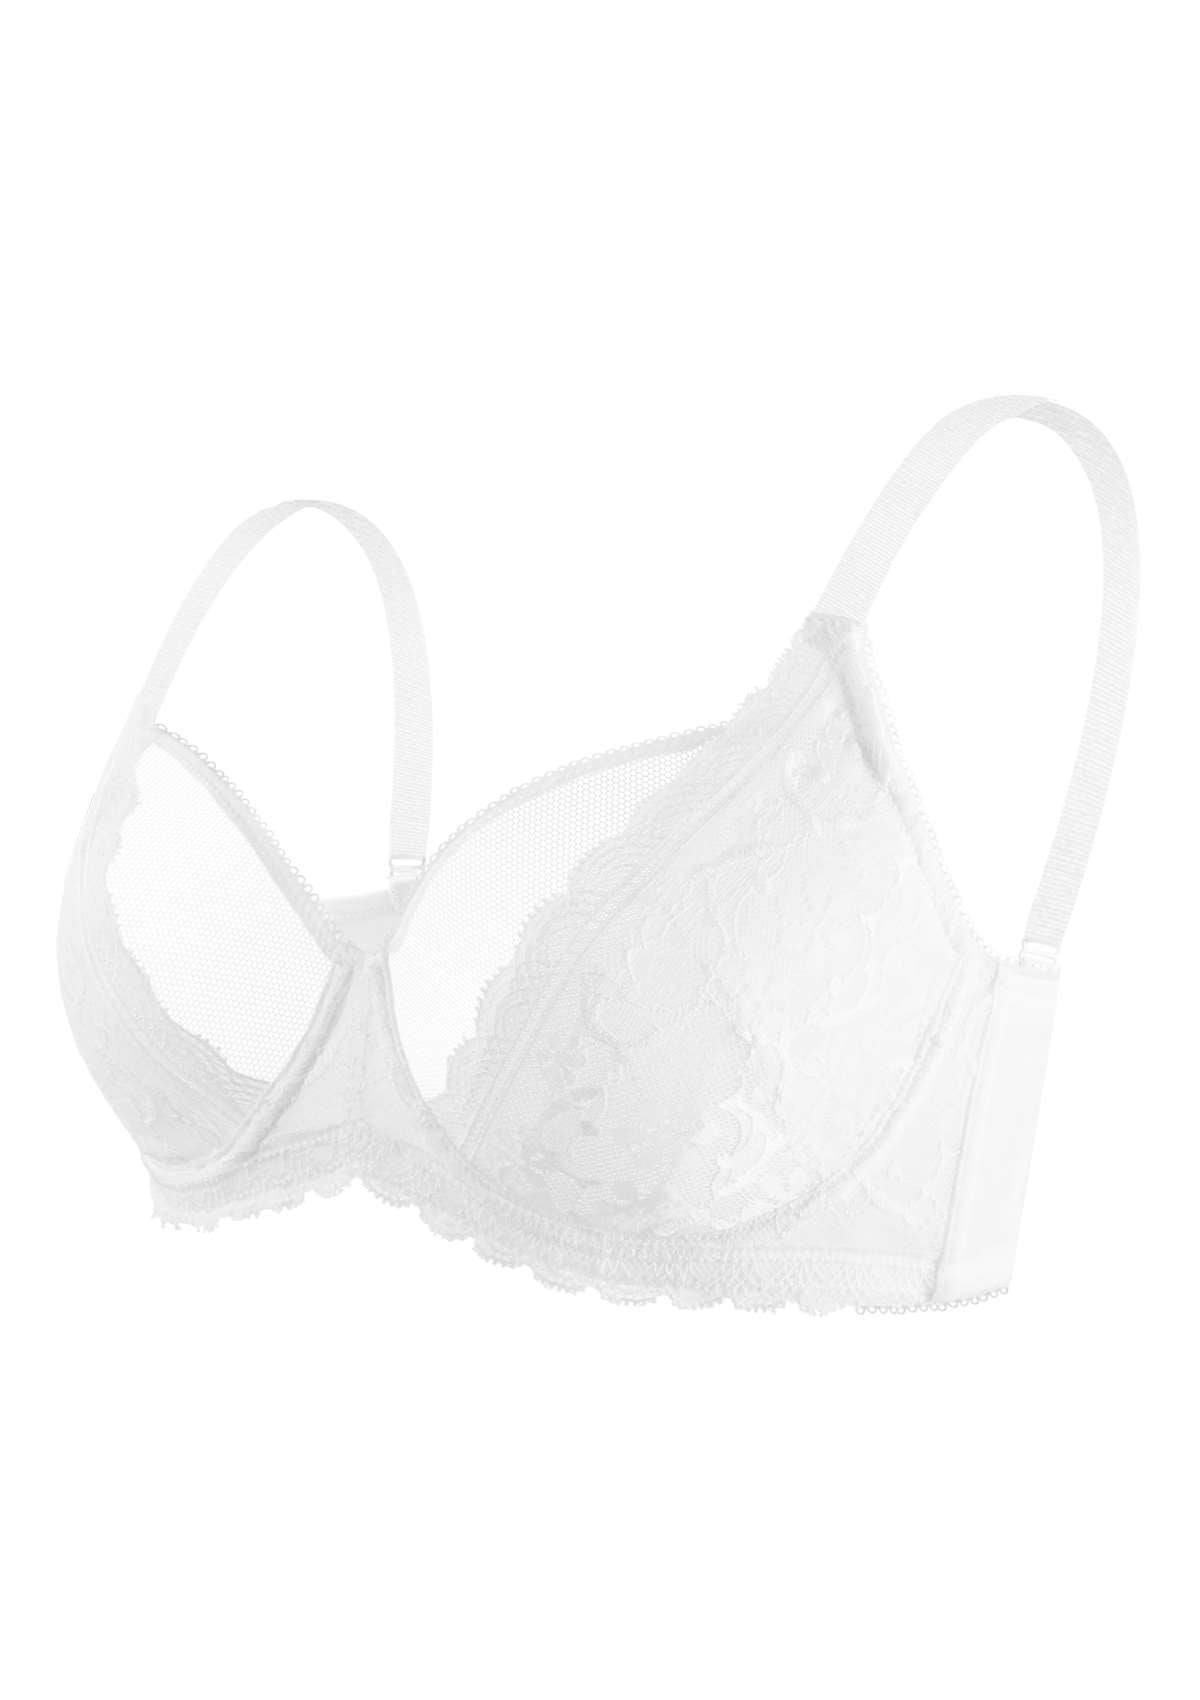 HSIA Anemone Big Bra: Best Bra For Lift And Support, Floral Bra - White / 36 / D